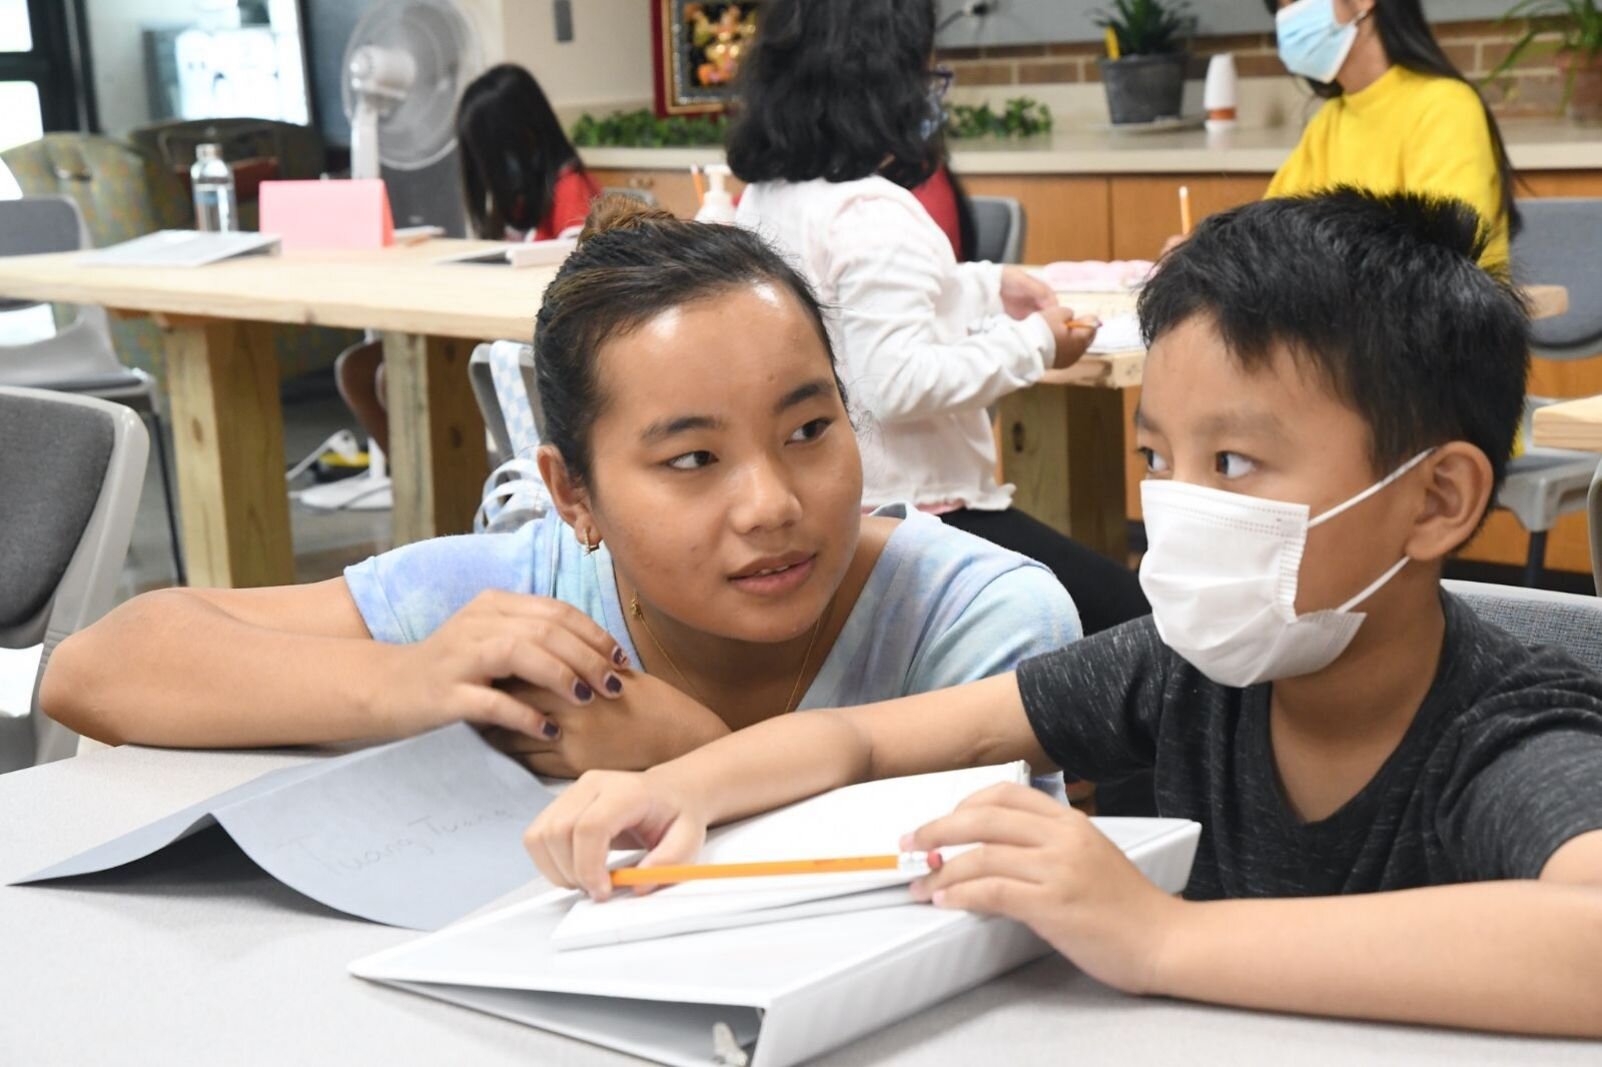 Teacher Dawt Par works with student Klup Tuang, 9, during a summer school session at the Burma Center.